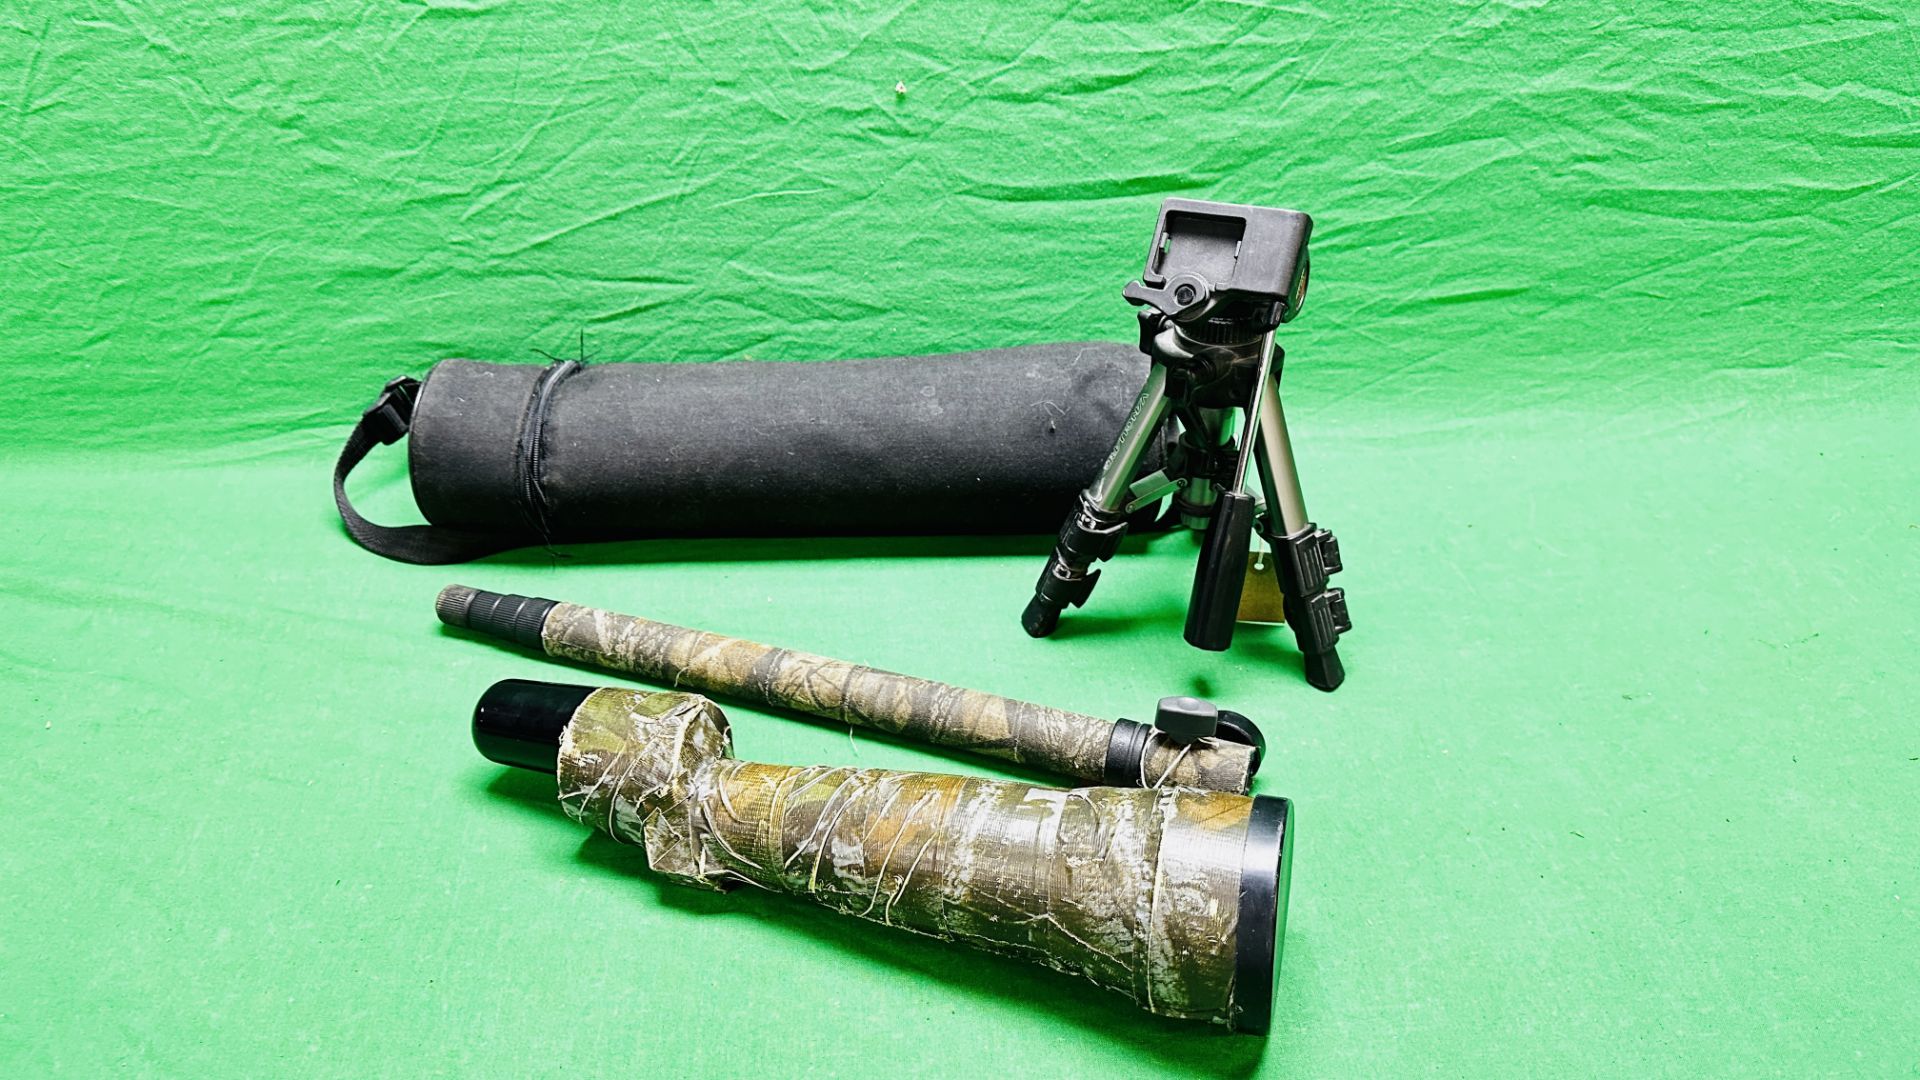 A MIRUDOR SPOTTING SCOPE COMPLETE WITH TRIPOD, CARRY CASE AND MONOPOD STICK.